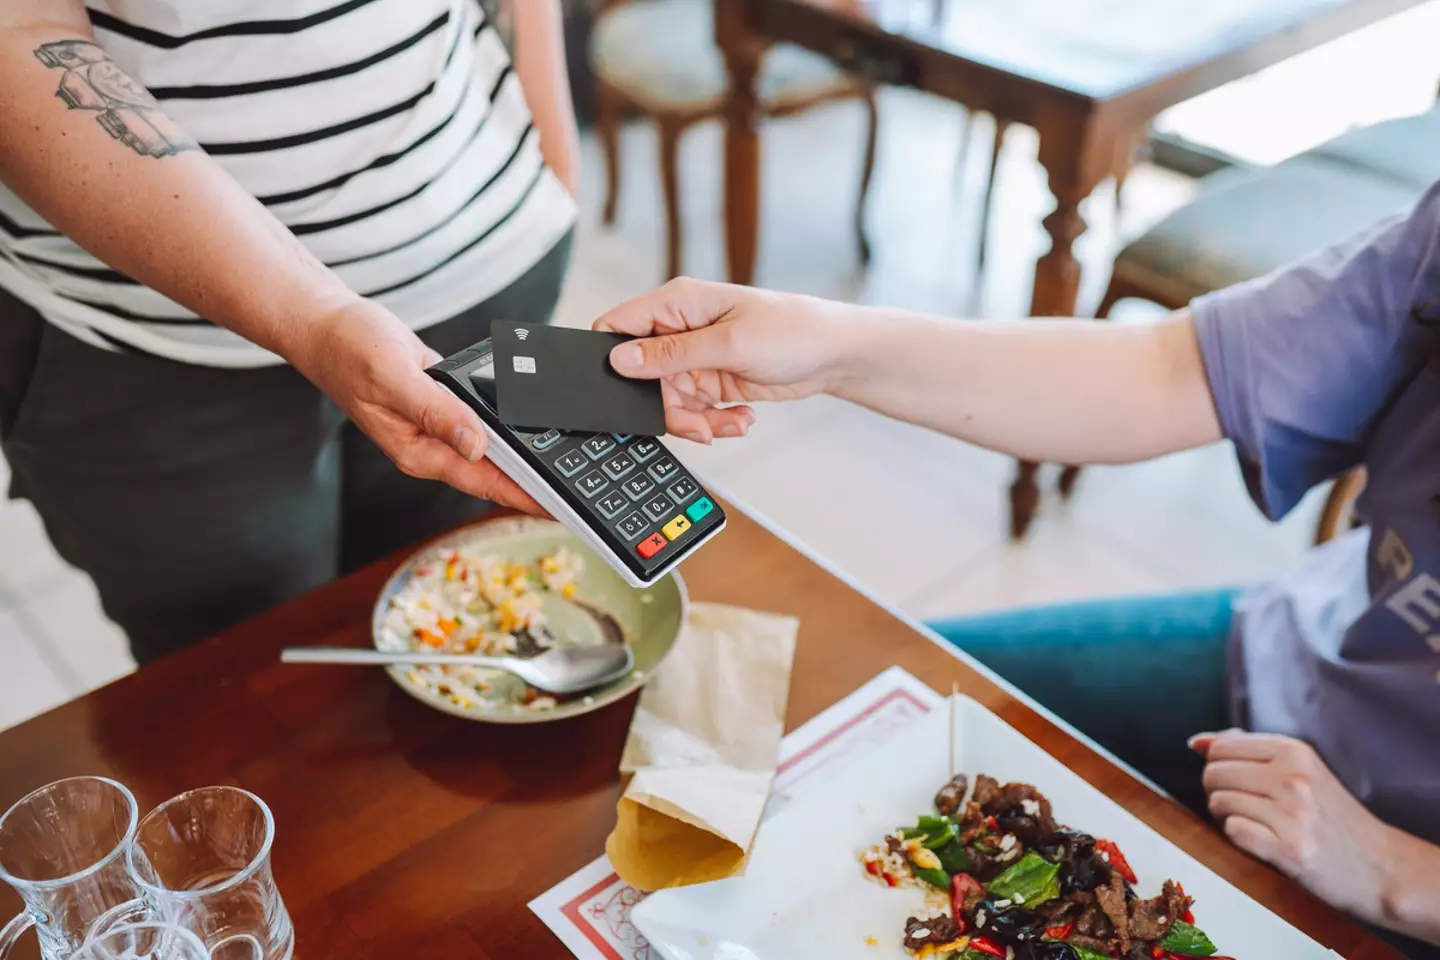 It seems card payments might become a thing of the past if apps like Sunday are replacing it (Getty Stock Image)